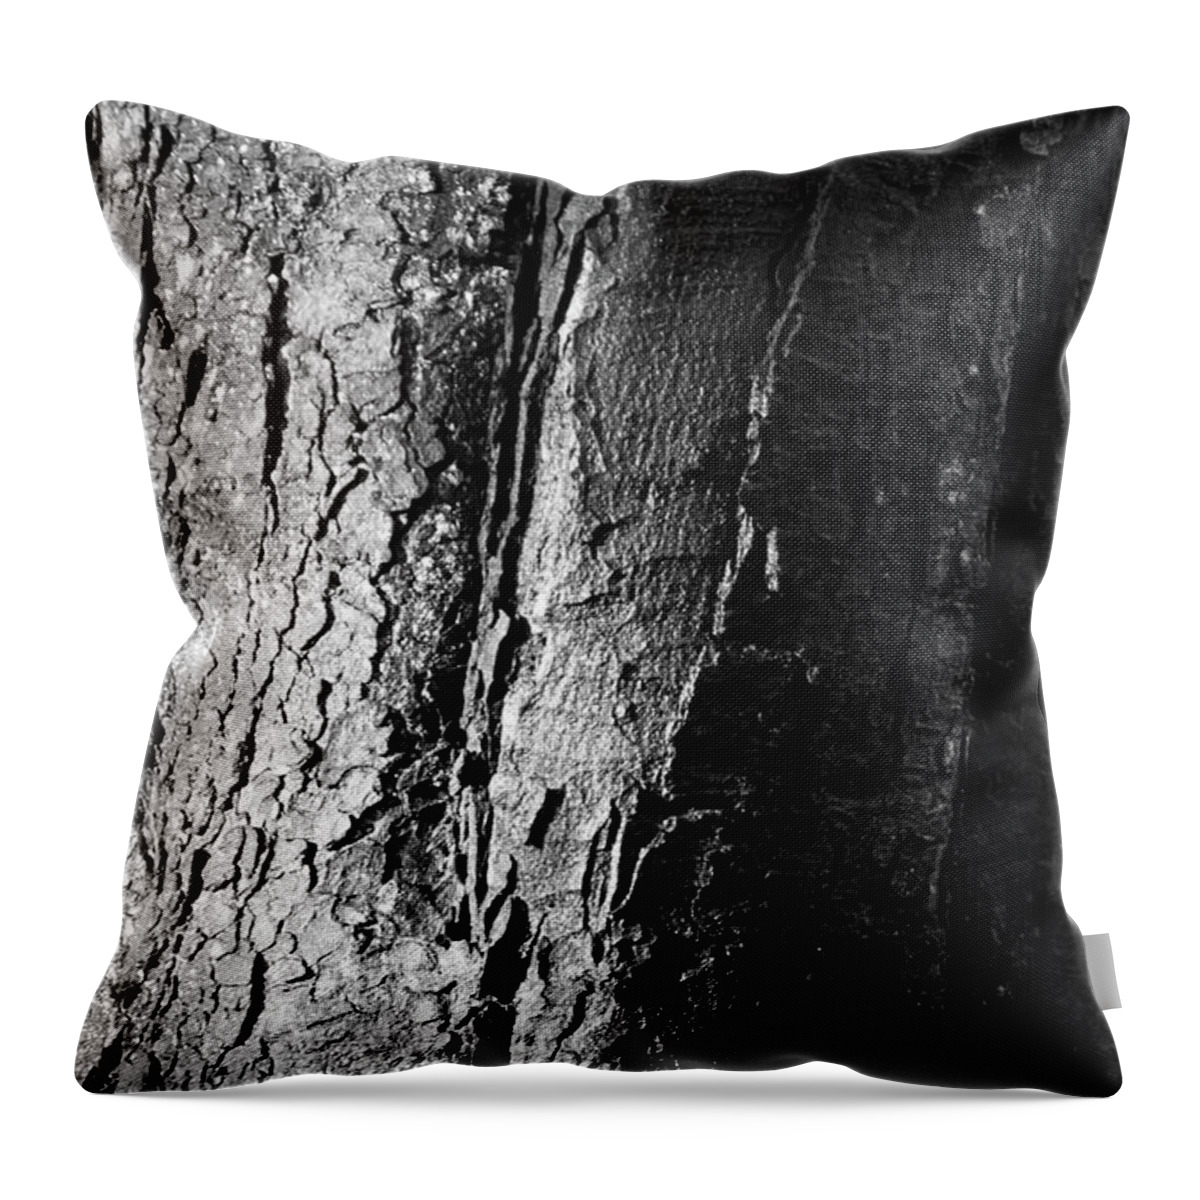 Lister Park Throw Pillow featuring the photograph As If Another by Jez C Self